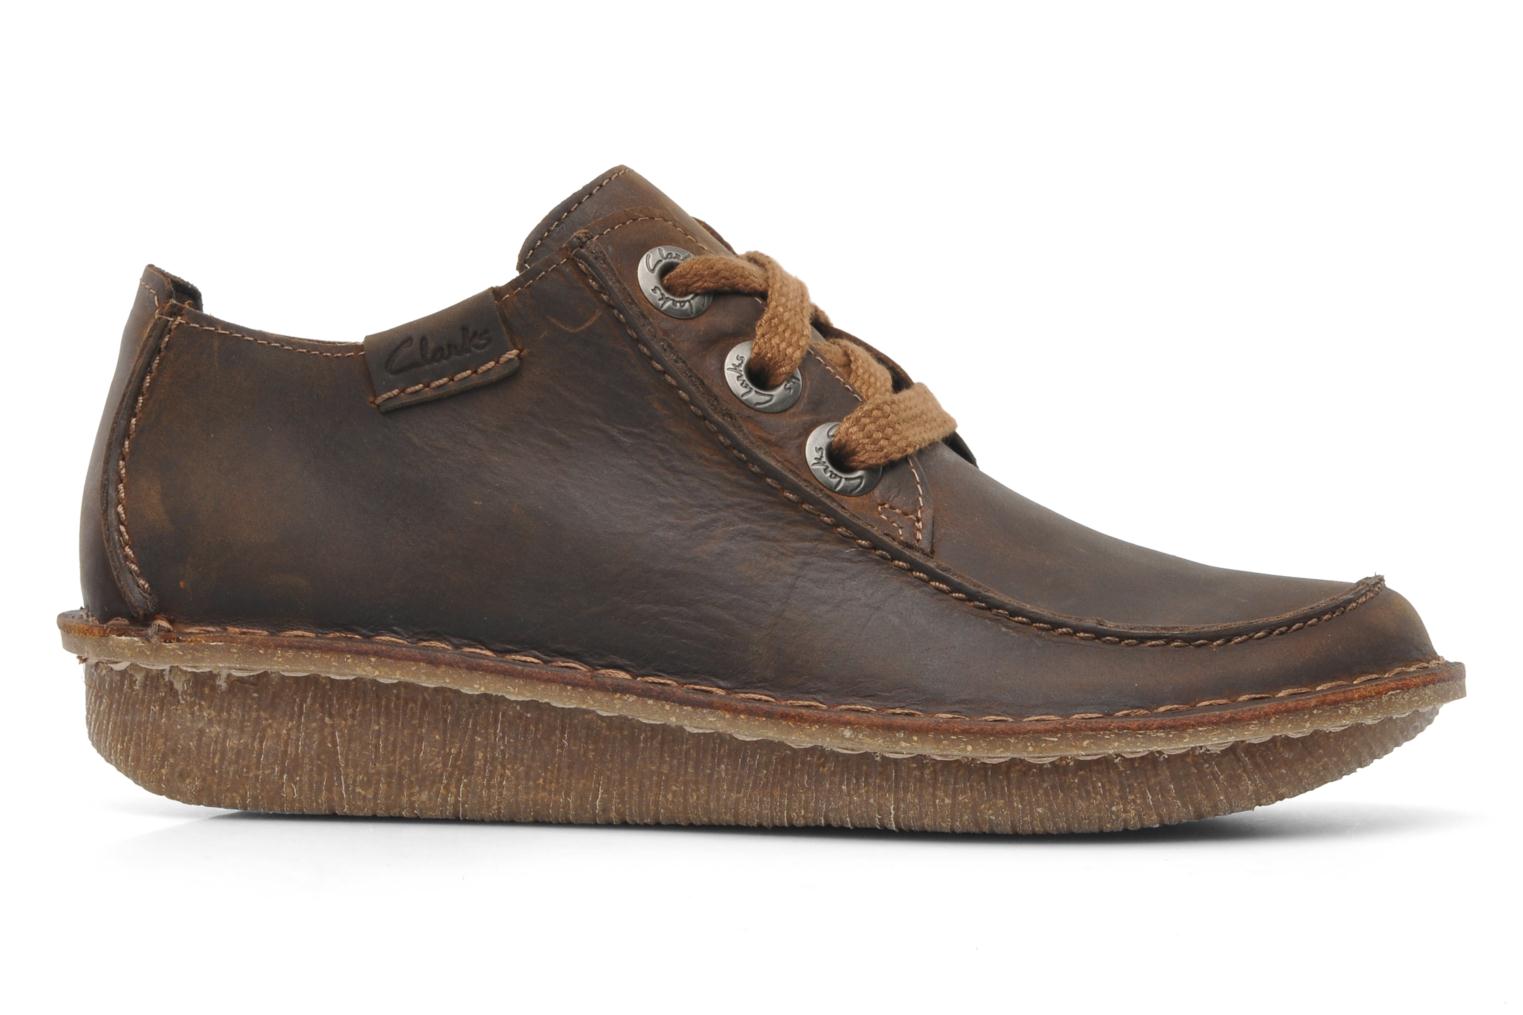 Clarks Funny Dream Lace-up shoes in Brown at Sarenza.co.uk (195010)